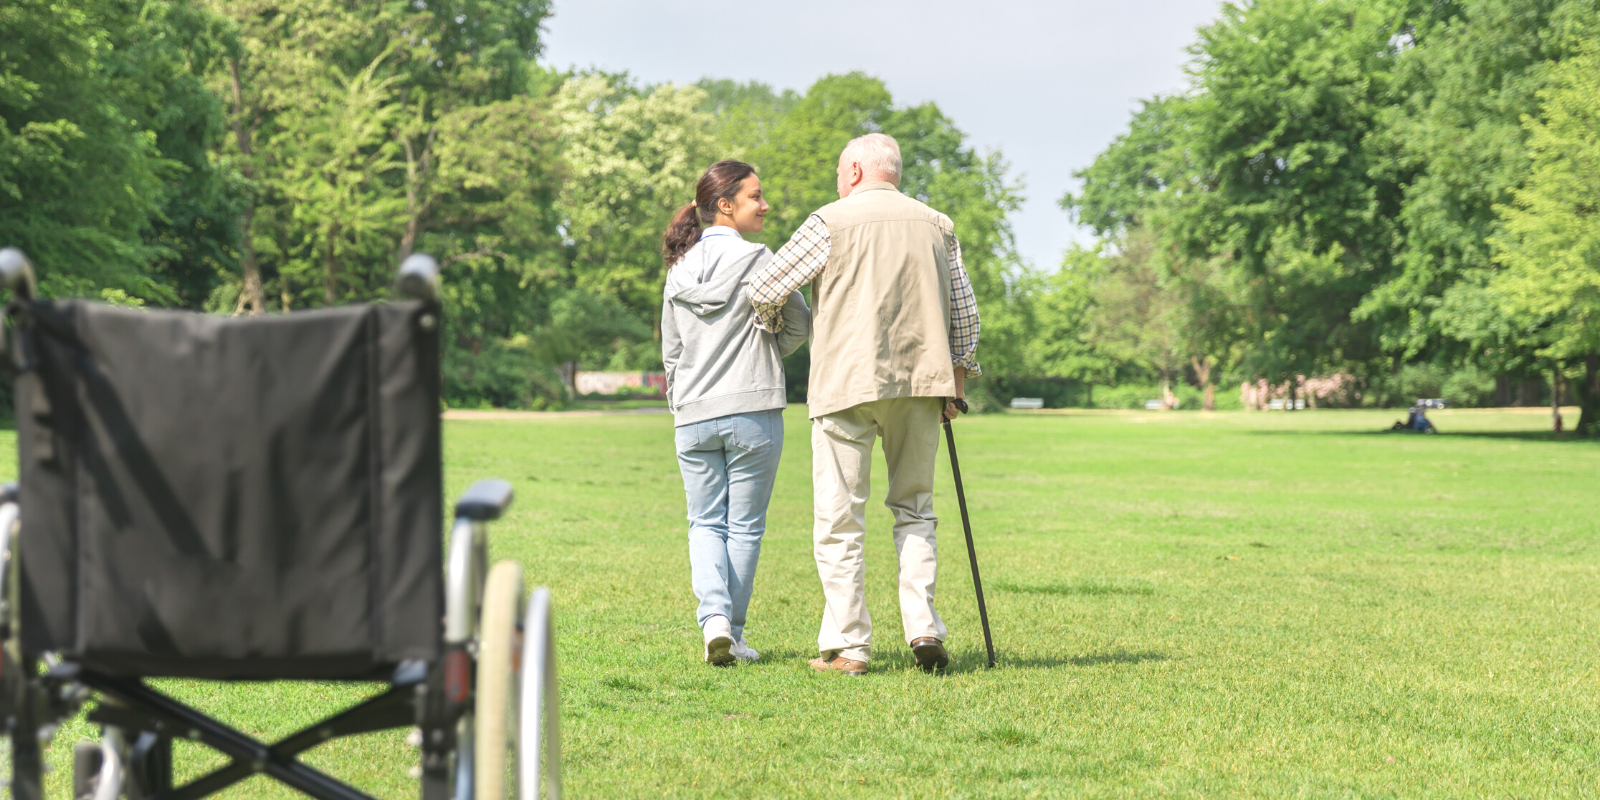 A photograph of a large green field, with an older white man with gray hair walking with a cane and a younger woman with brown skin and hair wearing jeans and a sweatshirt, both walking away from the camera, with an empty wheelchair in the foreground.